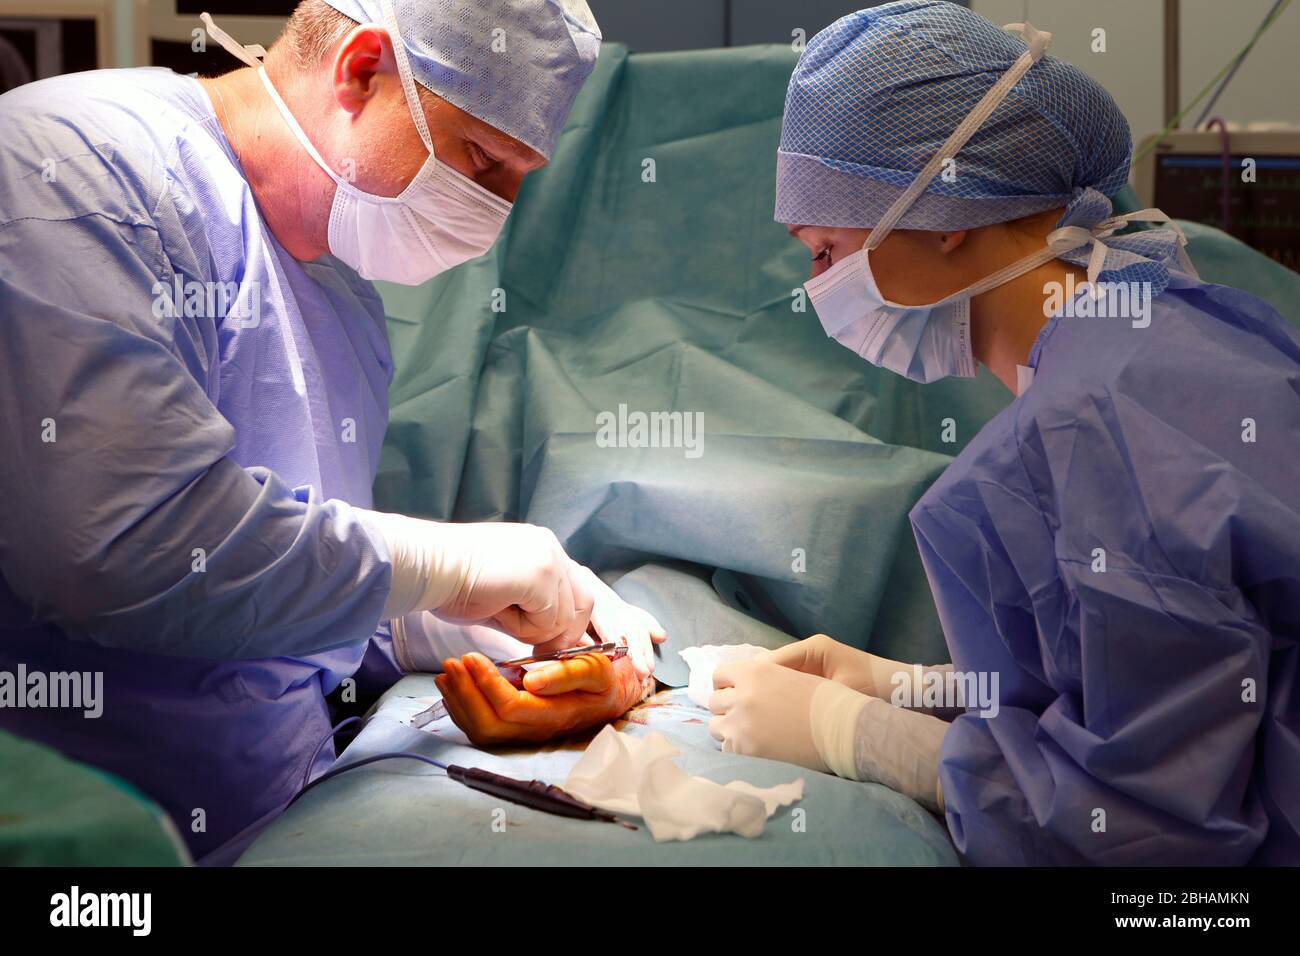 Surgeons in a hand operation Stock Photo